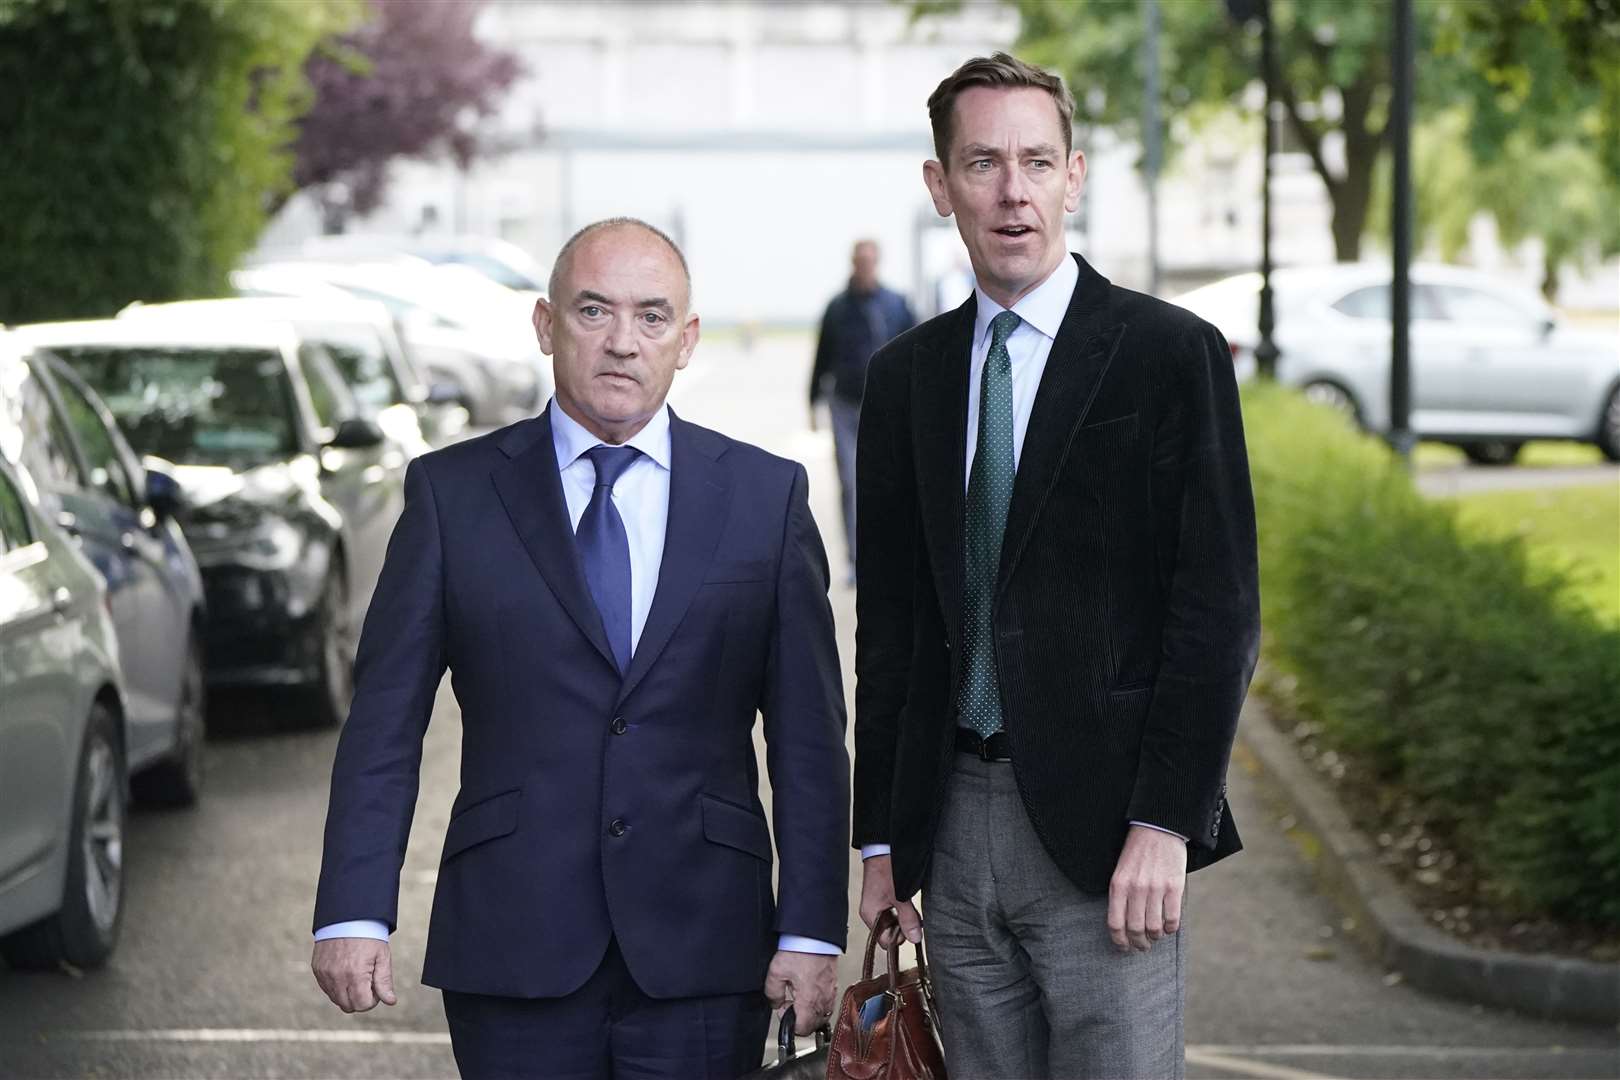 Talent agent Noel Kelly with his client Ryan Tubridy leaving Leinster House after a parliamentary committee hearing into the controversy (Niall Carson/PA)